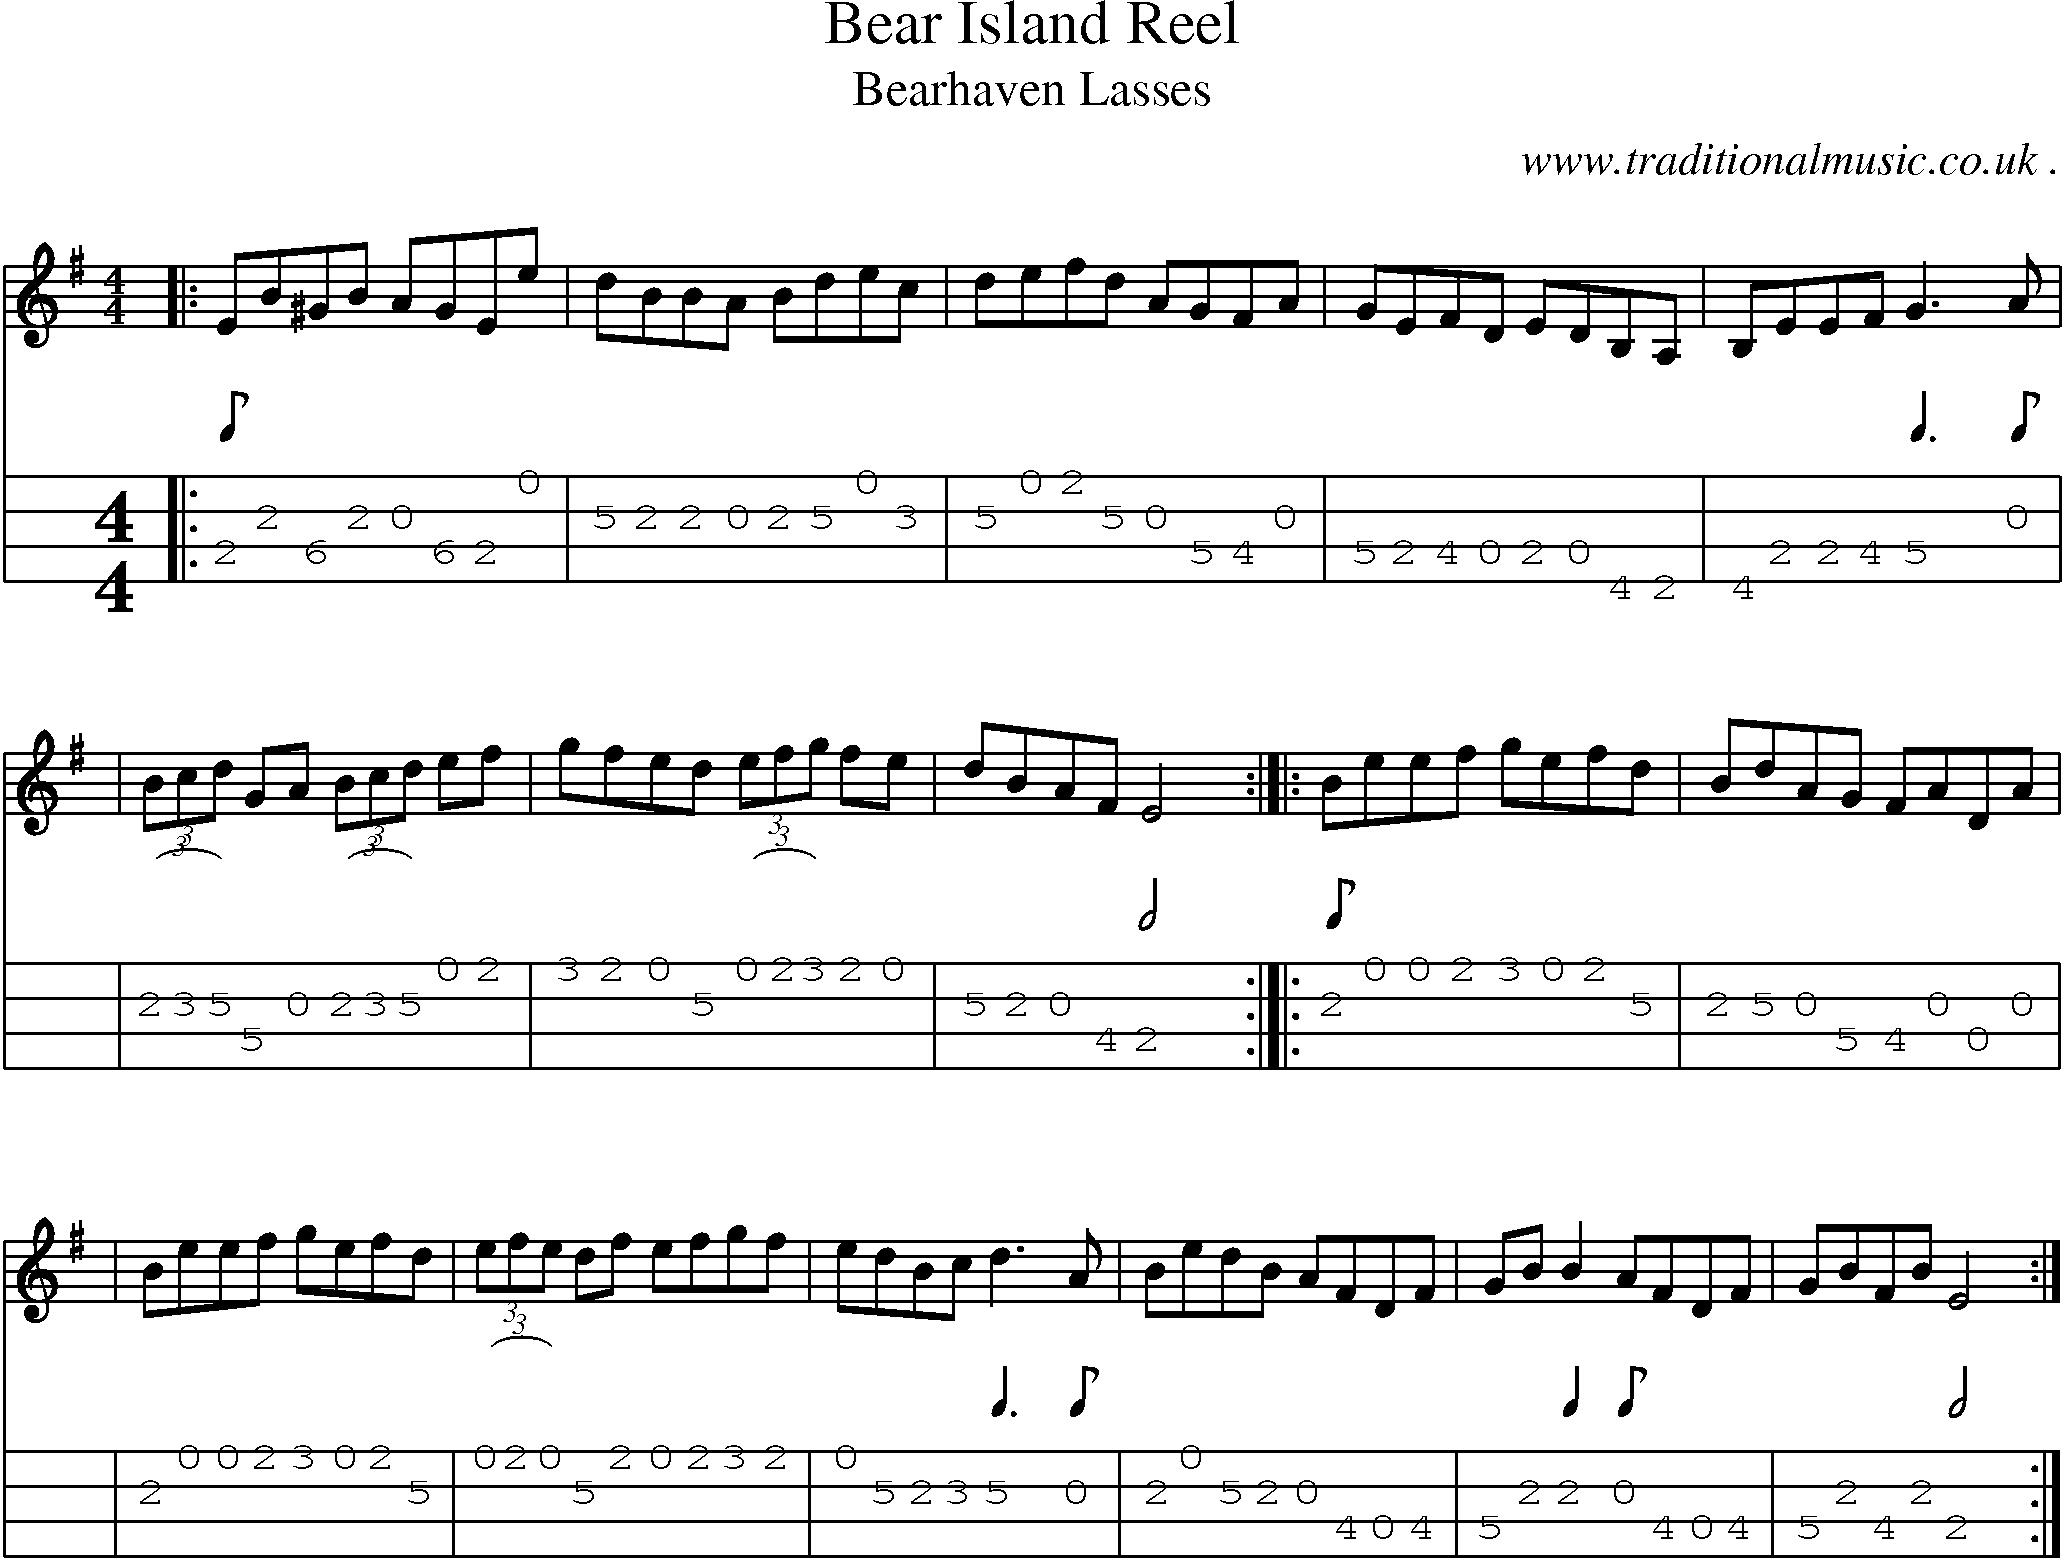 Sheet-music  score, Chords and Mandolin Tabs for Bear Island Reel